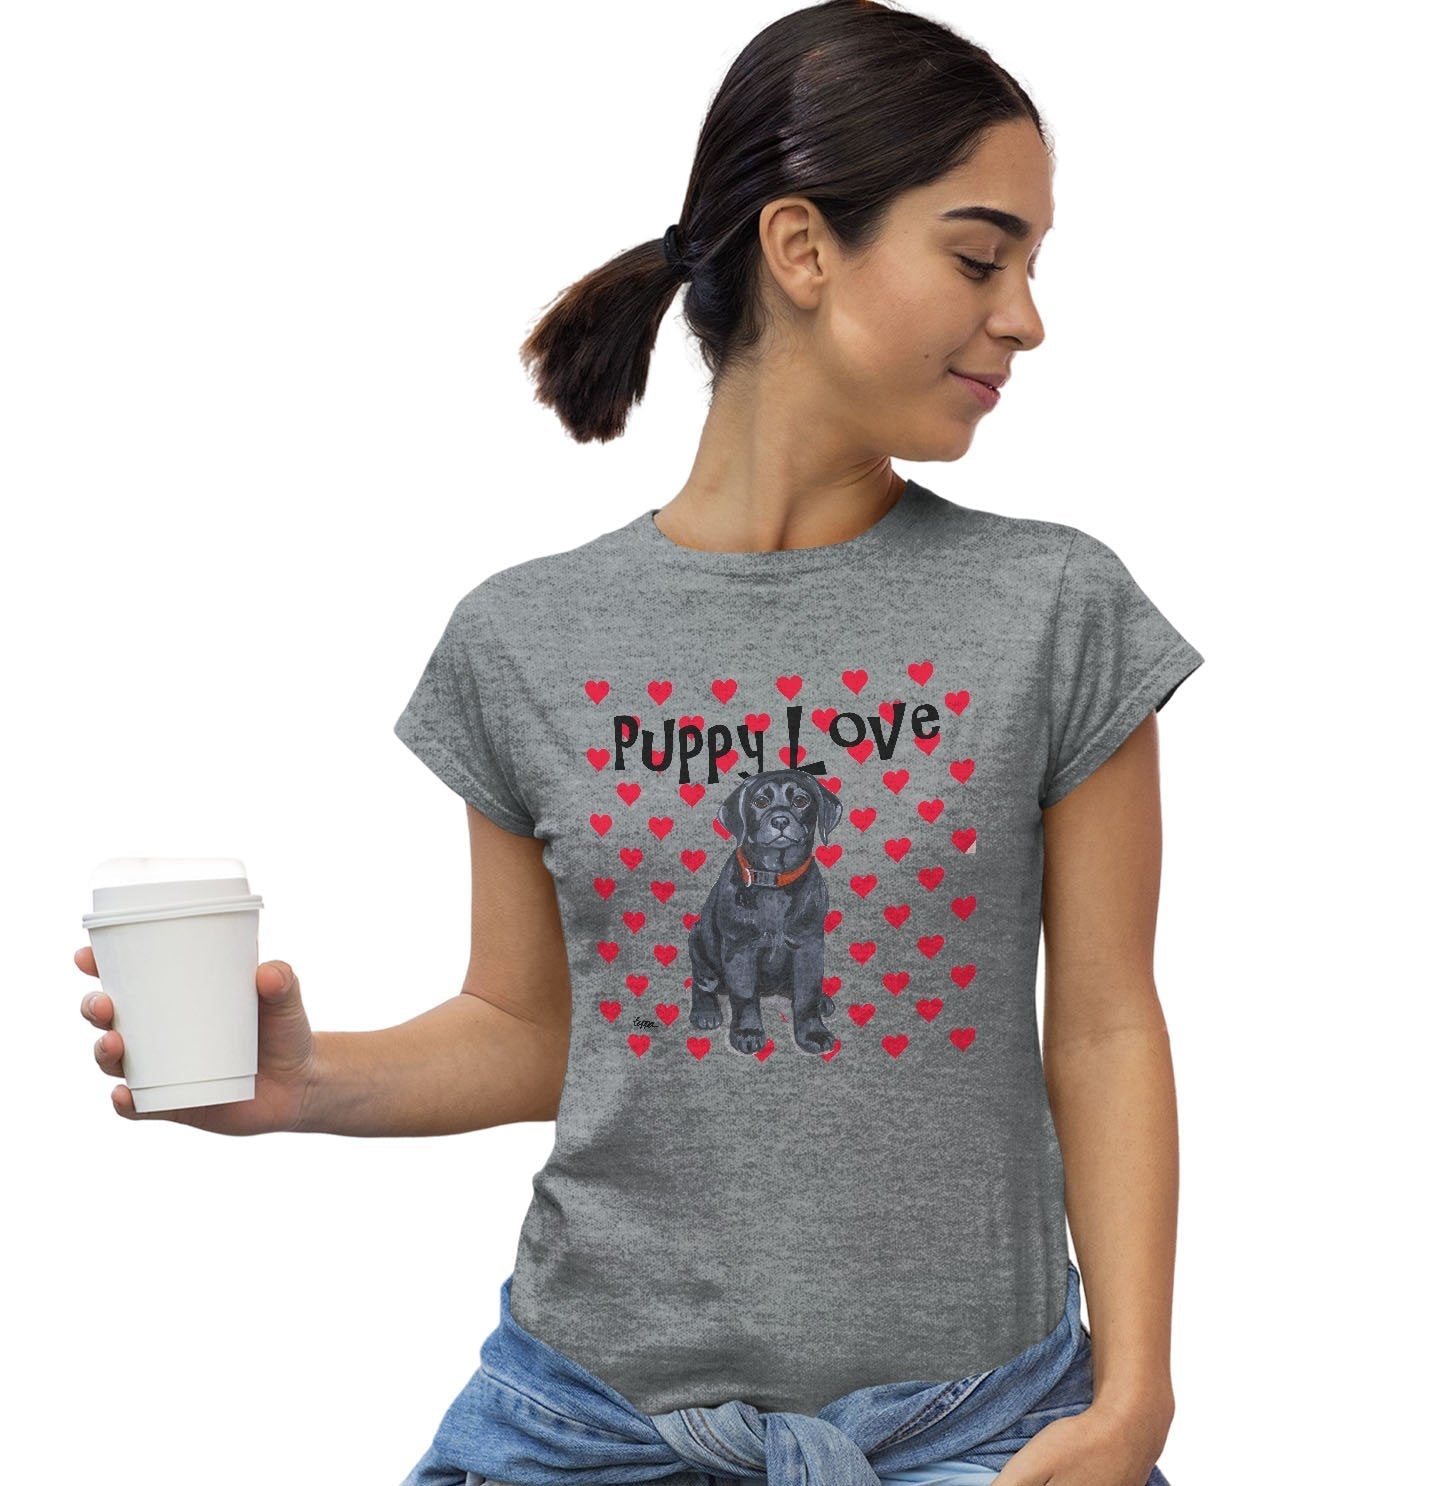 Black Lab Puppy Love - Women's Fitted T-Shirt